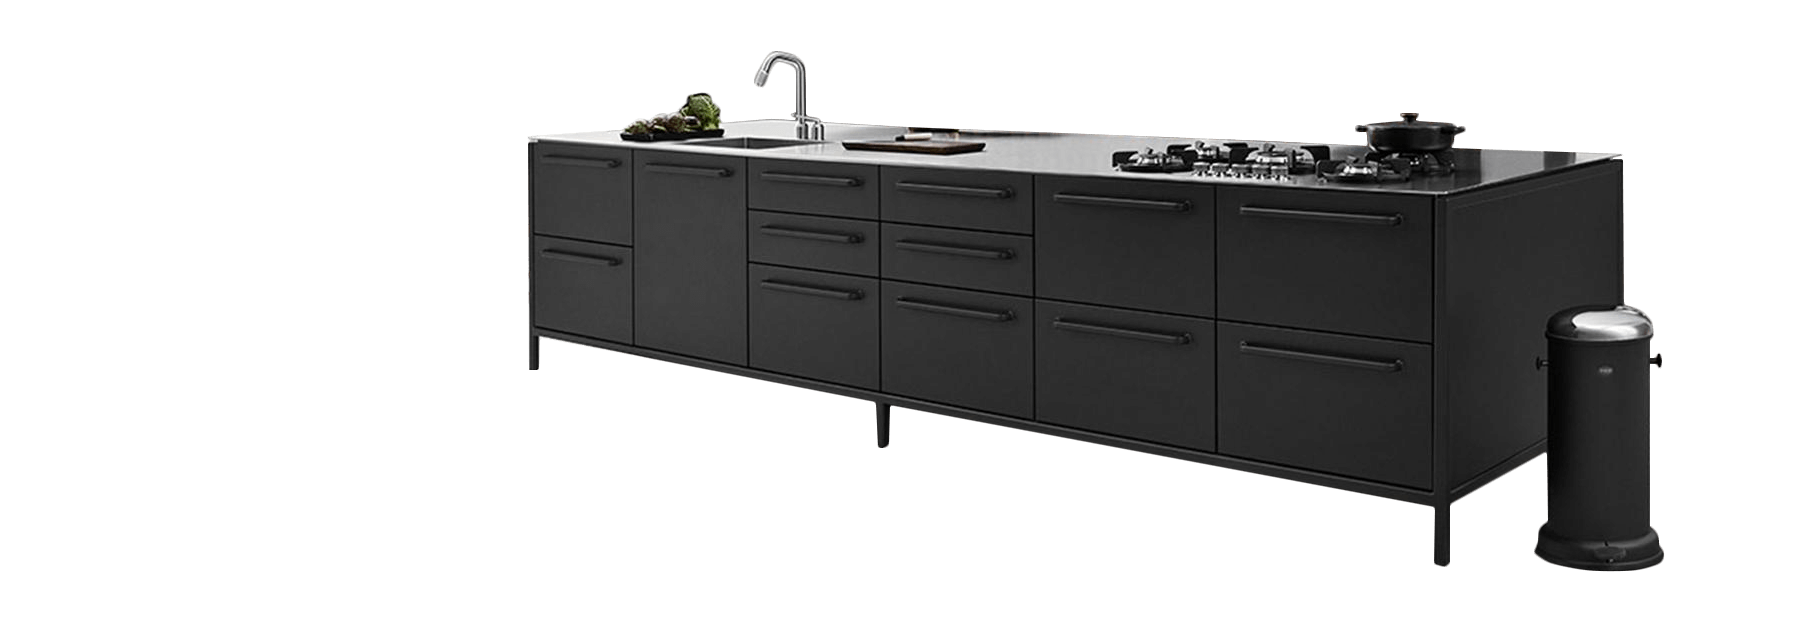 Vipp Kitchens Collections And Latest News Mohd Shop